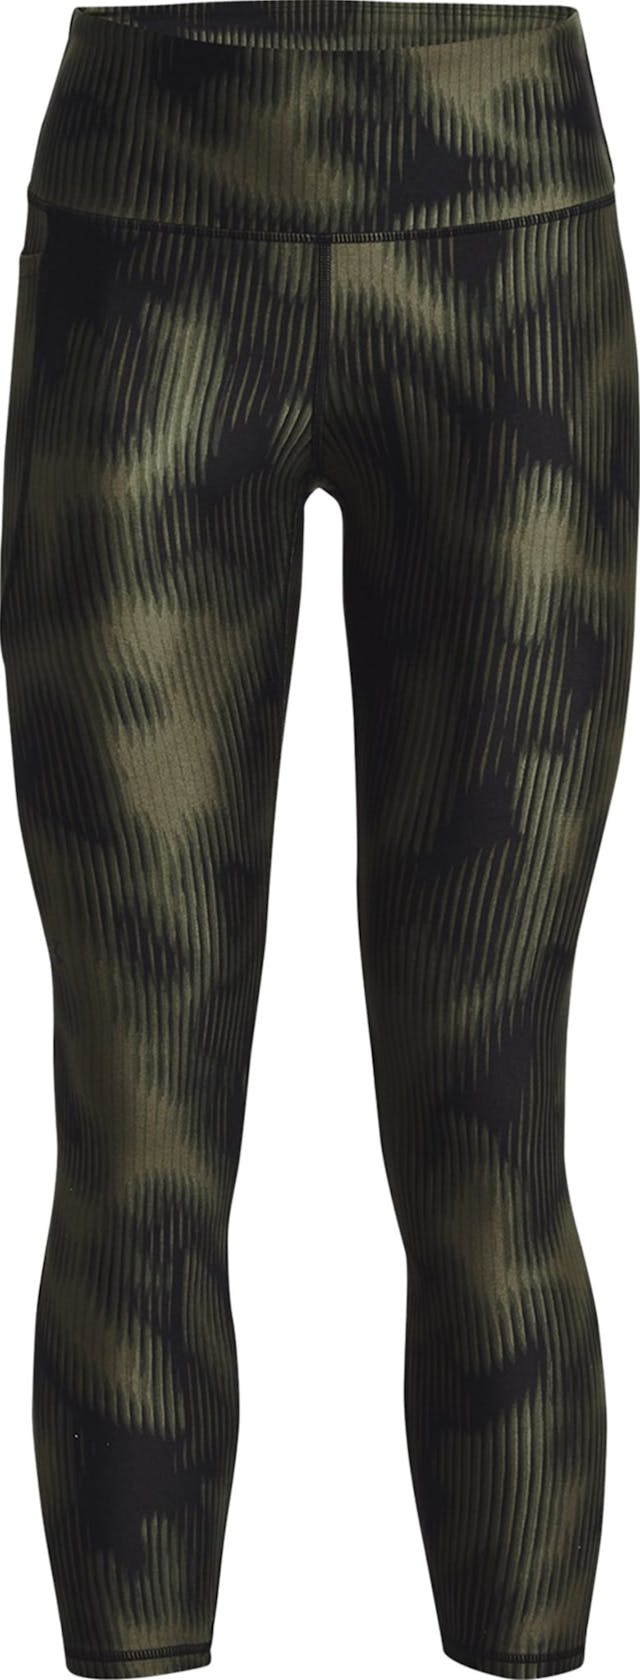 Product image for HeatGear Armour No-Slip Waistband Printed Ankle Leggings - Women's